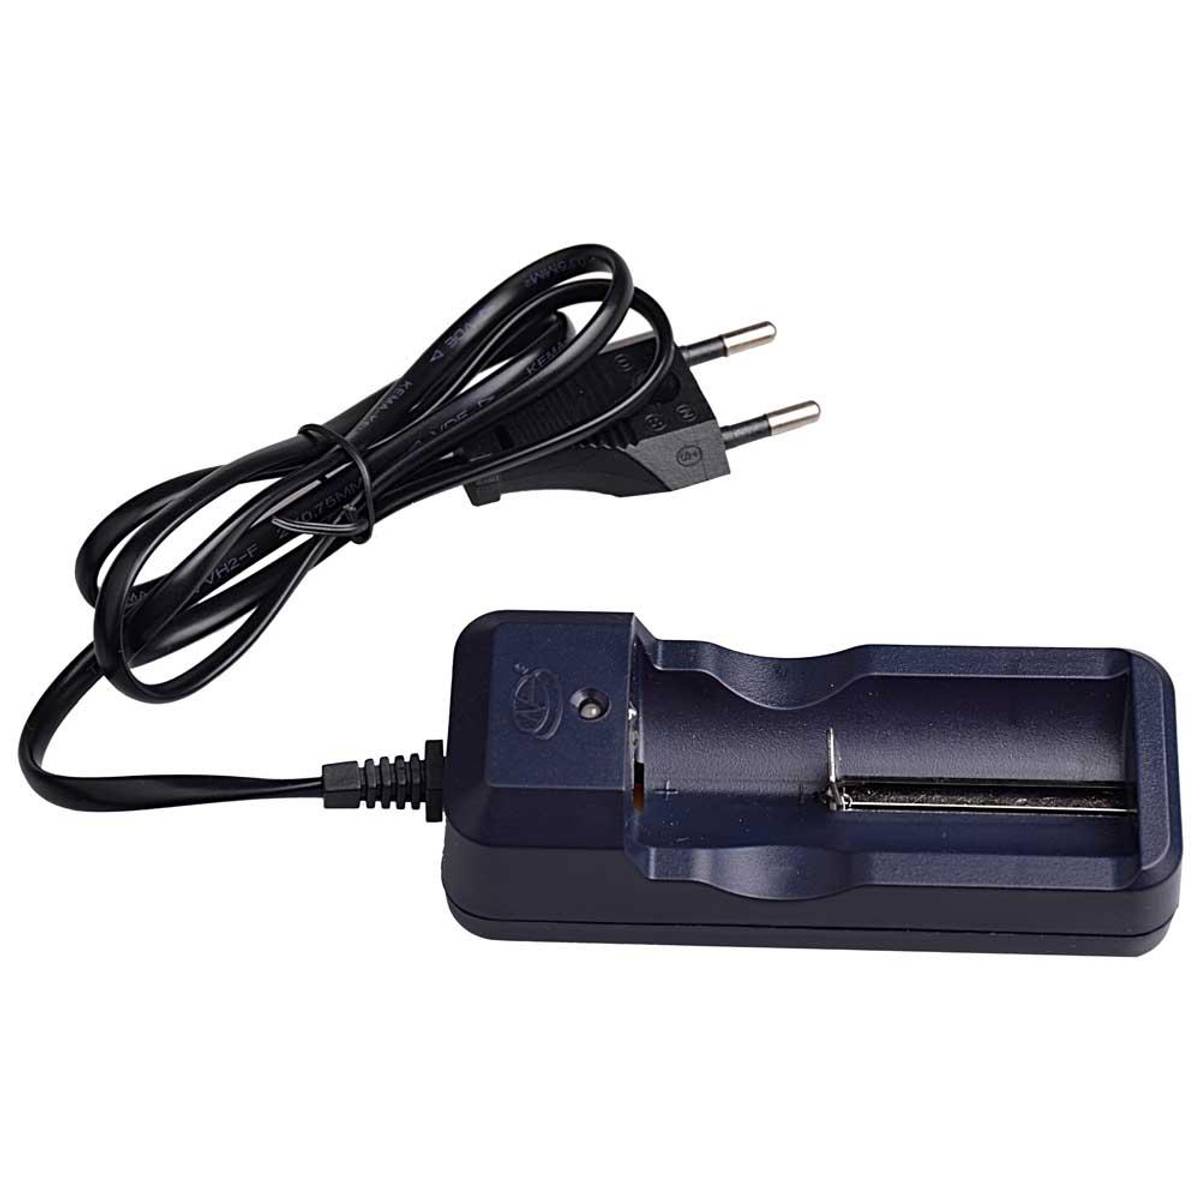 Orcatorch battery charger C105